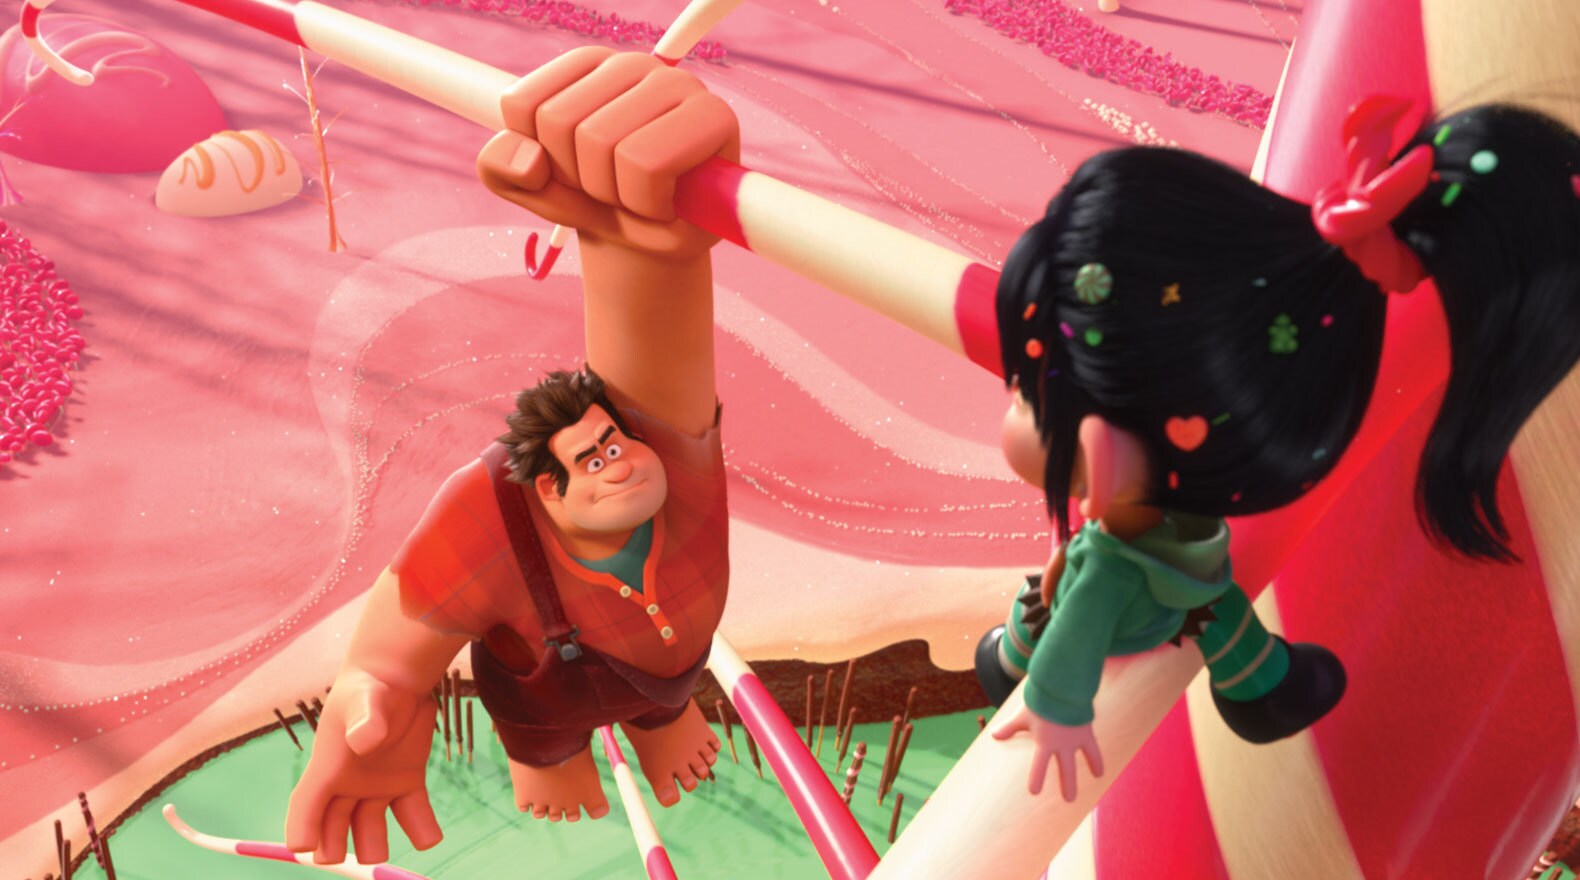 John C. Riley as Ralph hanging on to a candy cane, talking to Vanellope played by Sarah Silverman in "Wreck-It Ralph"